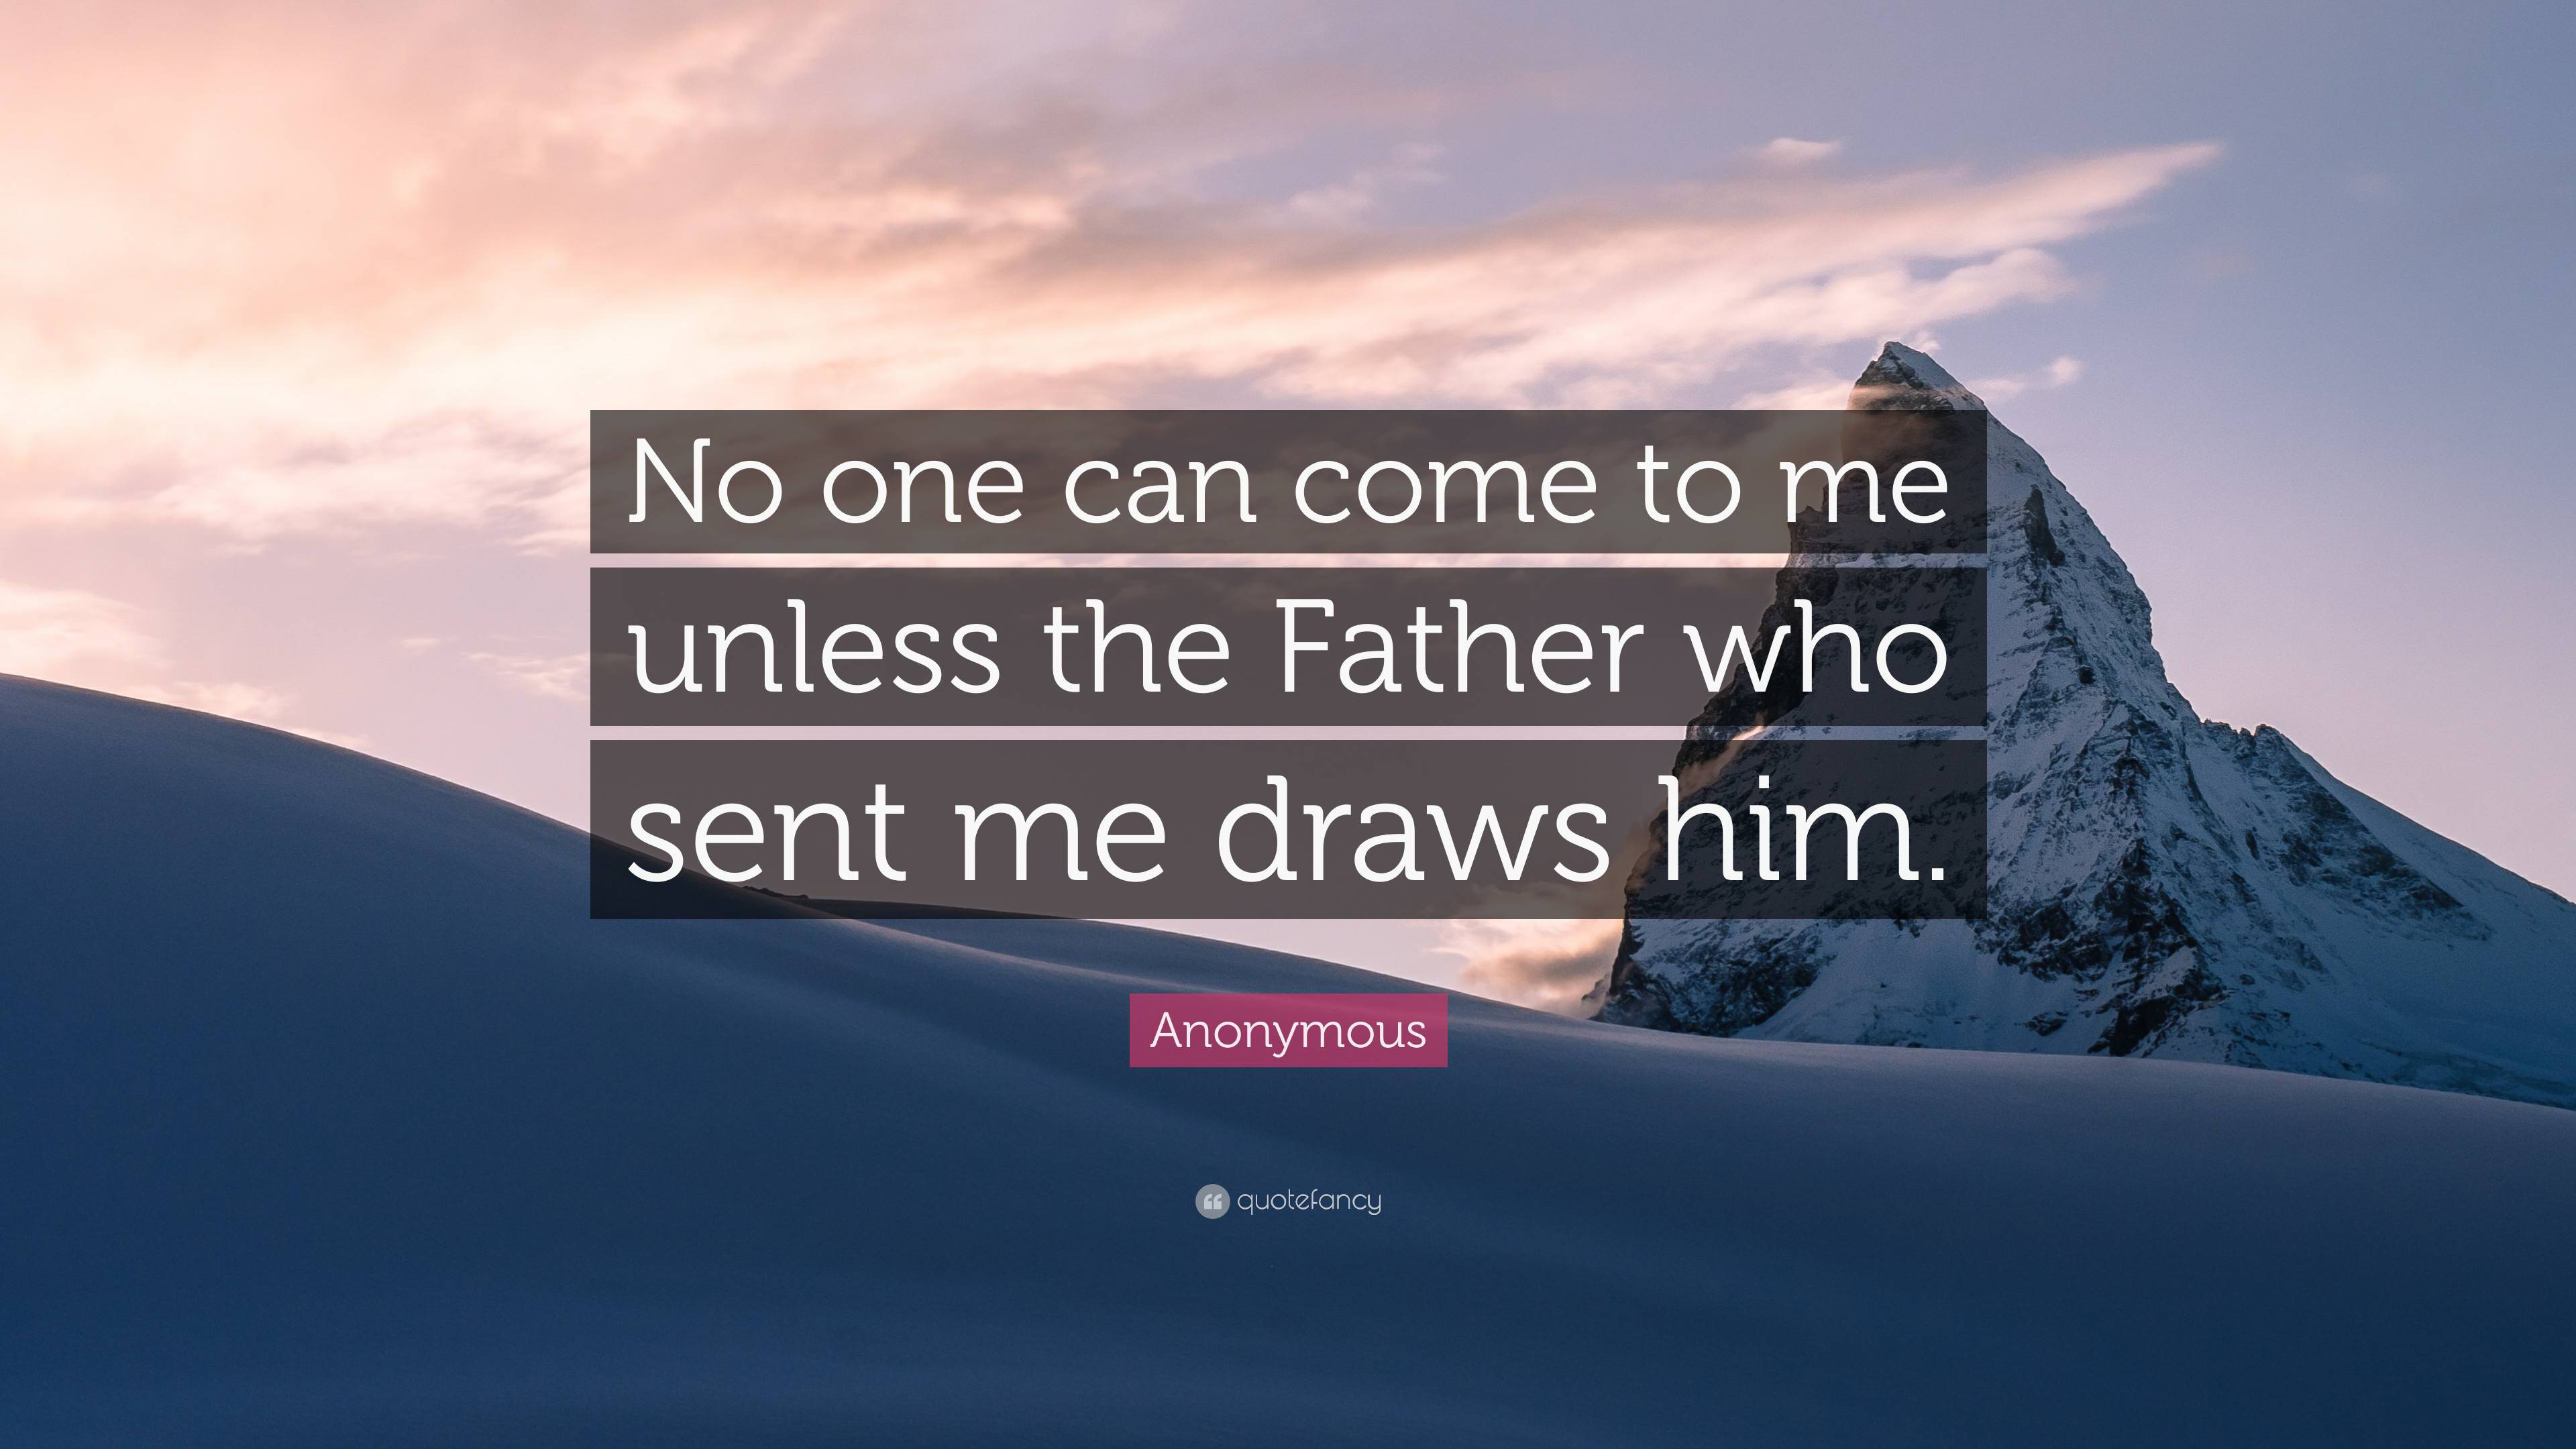 Anonymous Quote “No one can come to me unless the Father who sent me